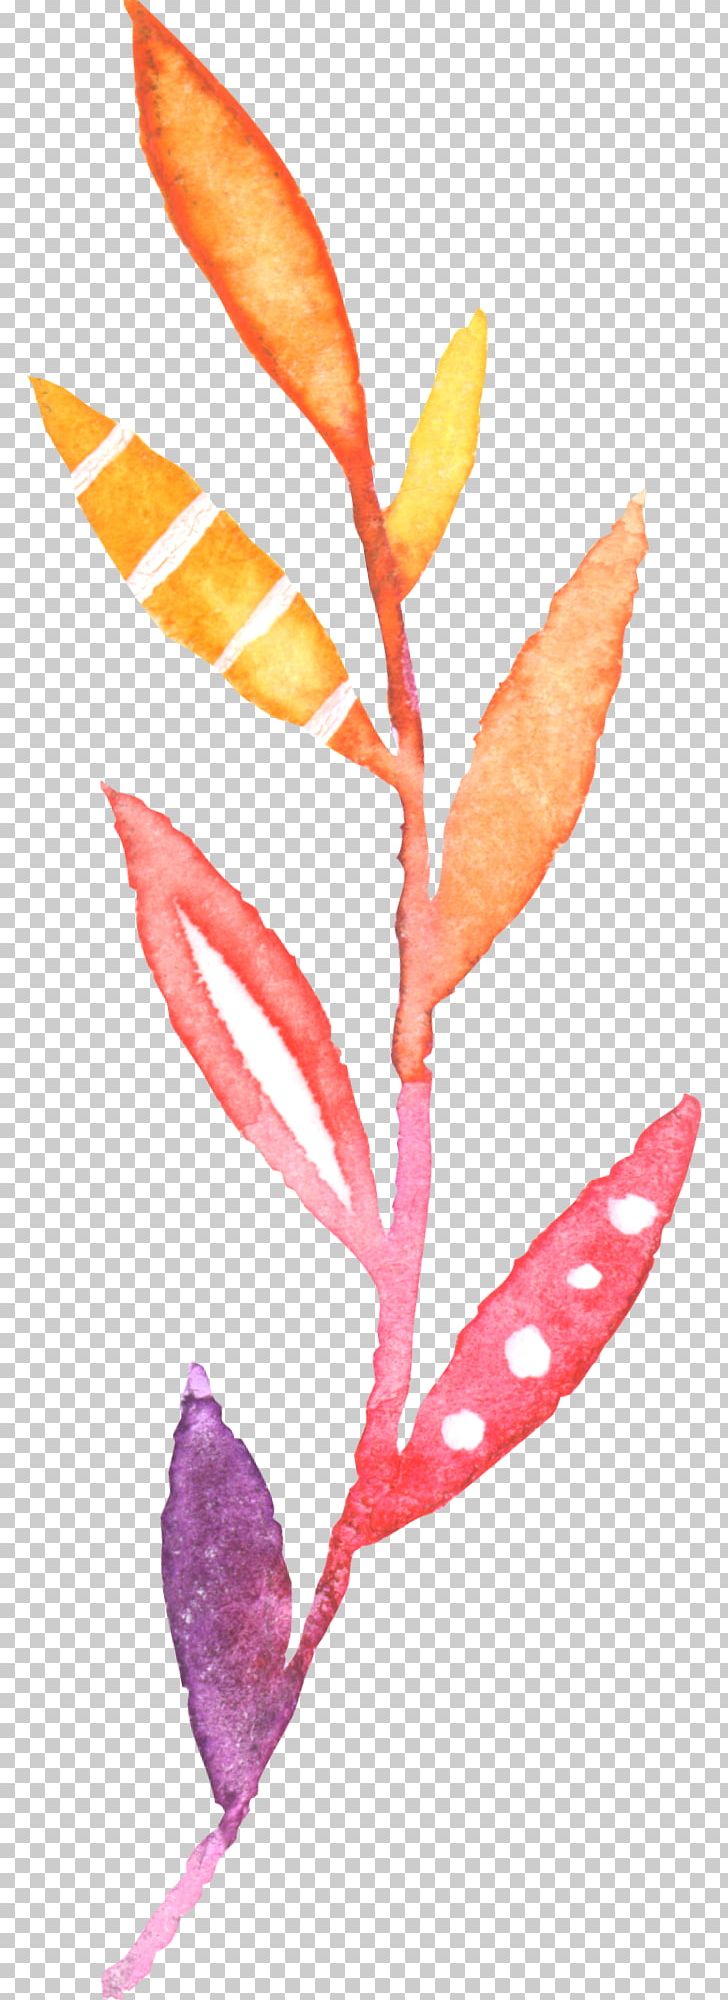 Watercolor: Flowers Watercolor Painting PNG, Clipart, Art, Branch, Decorative, Floral, Flower Free PNG Download